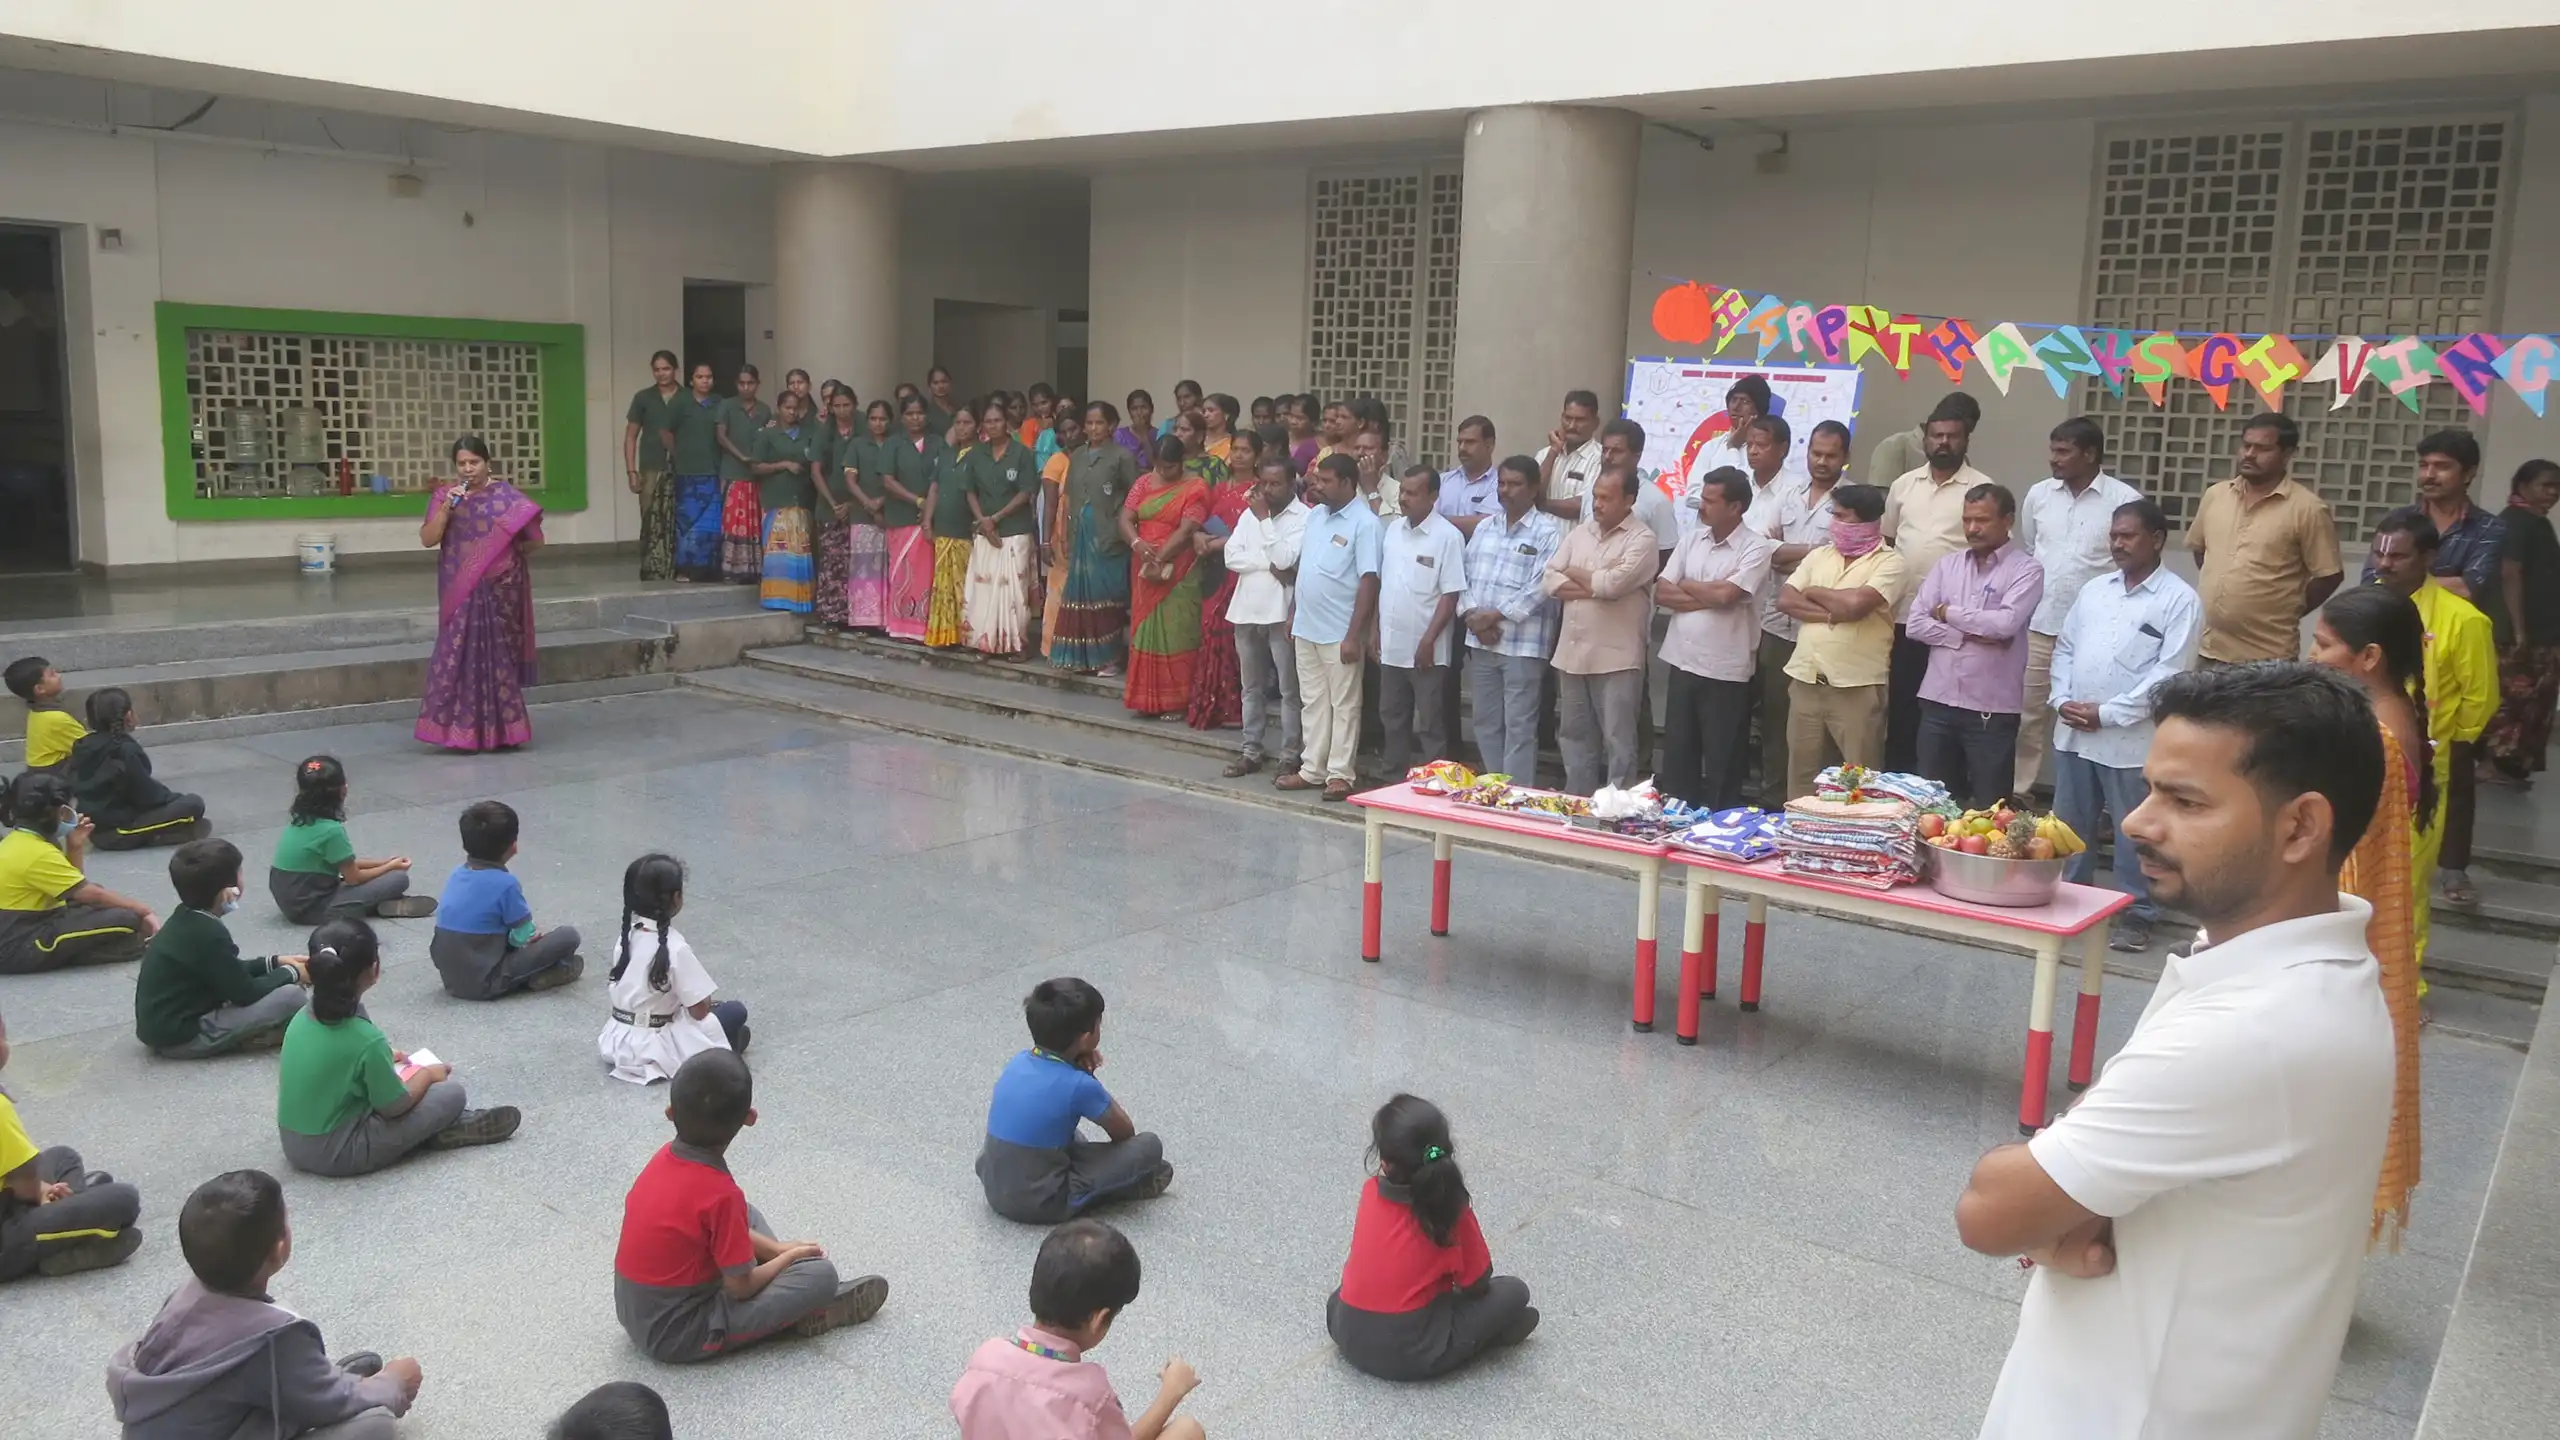 Students sitting in the floor and listening to teacher during thanks giving celebration at DPS Warangal.